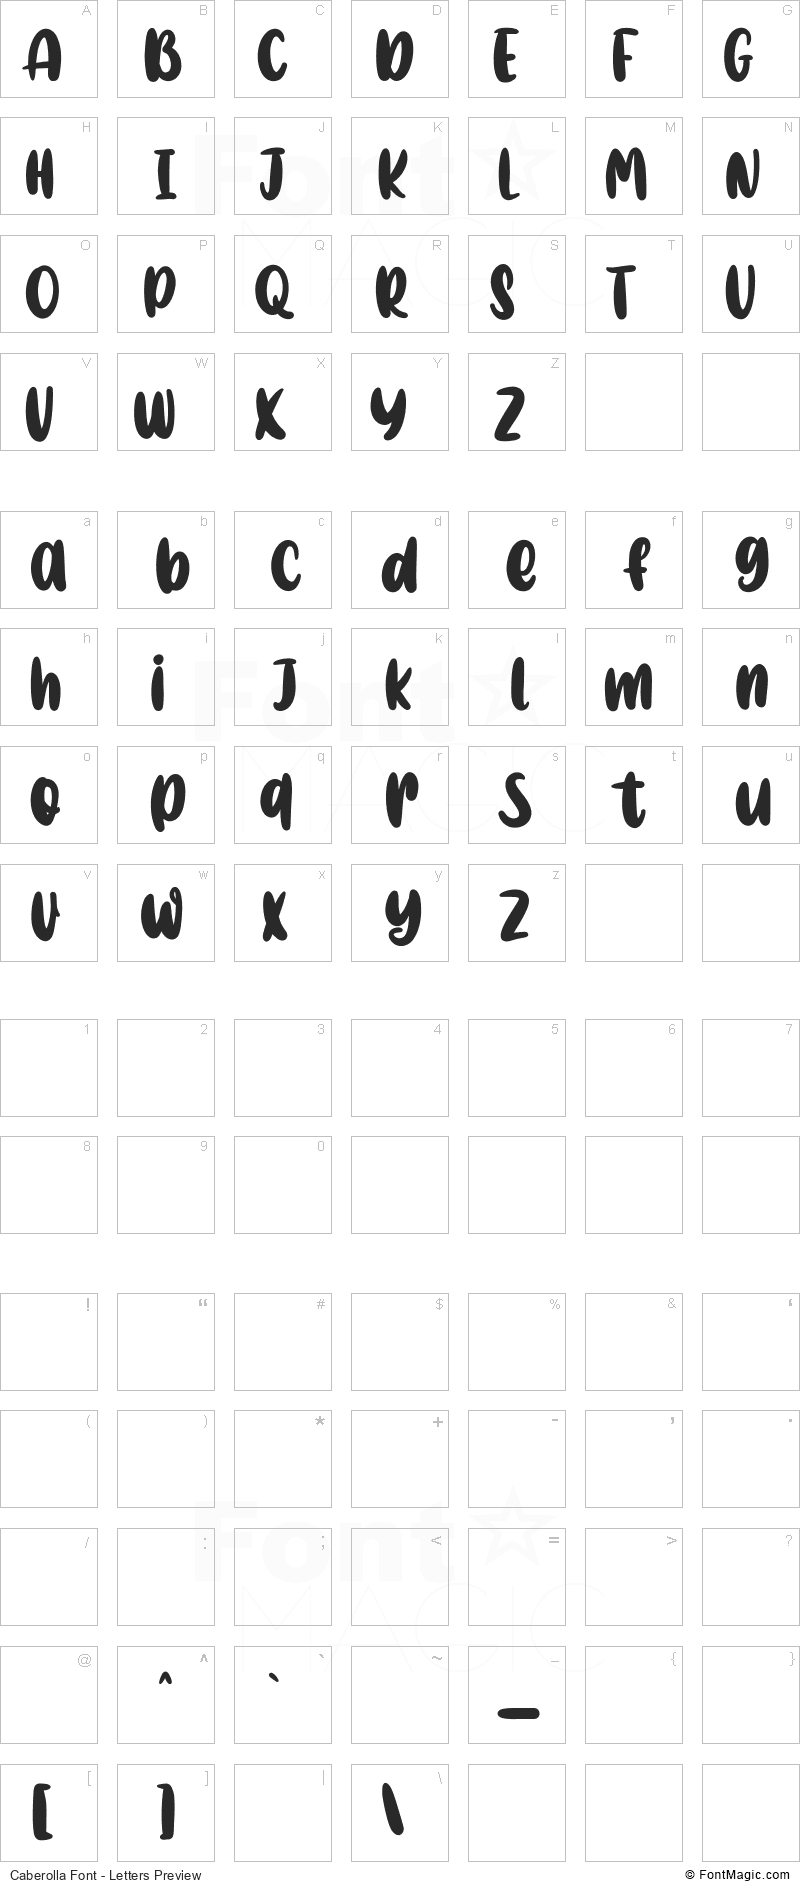 Caberolla Font - All Latters Preview Chart